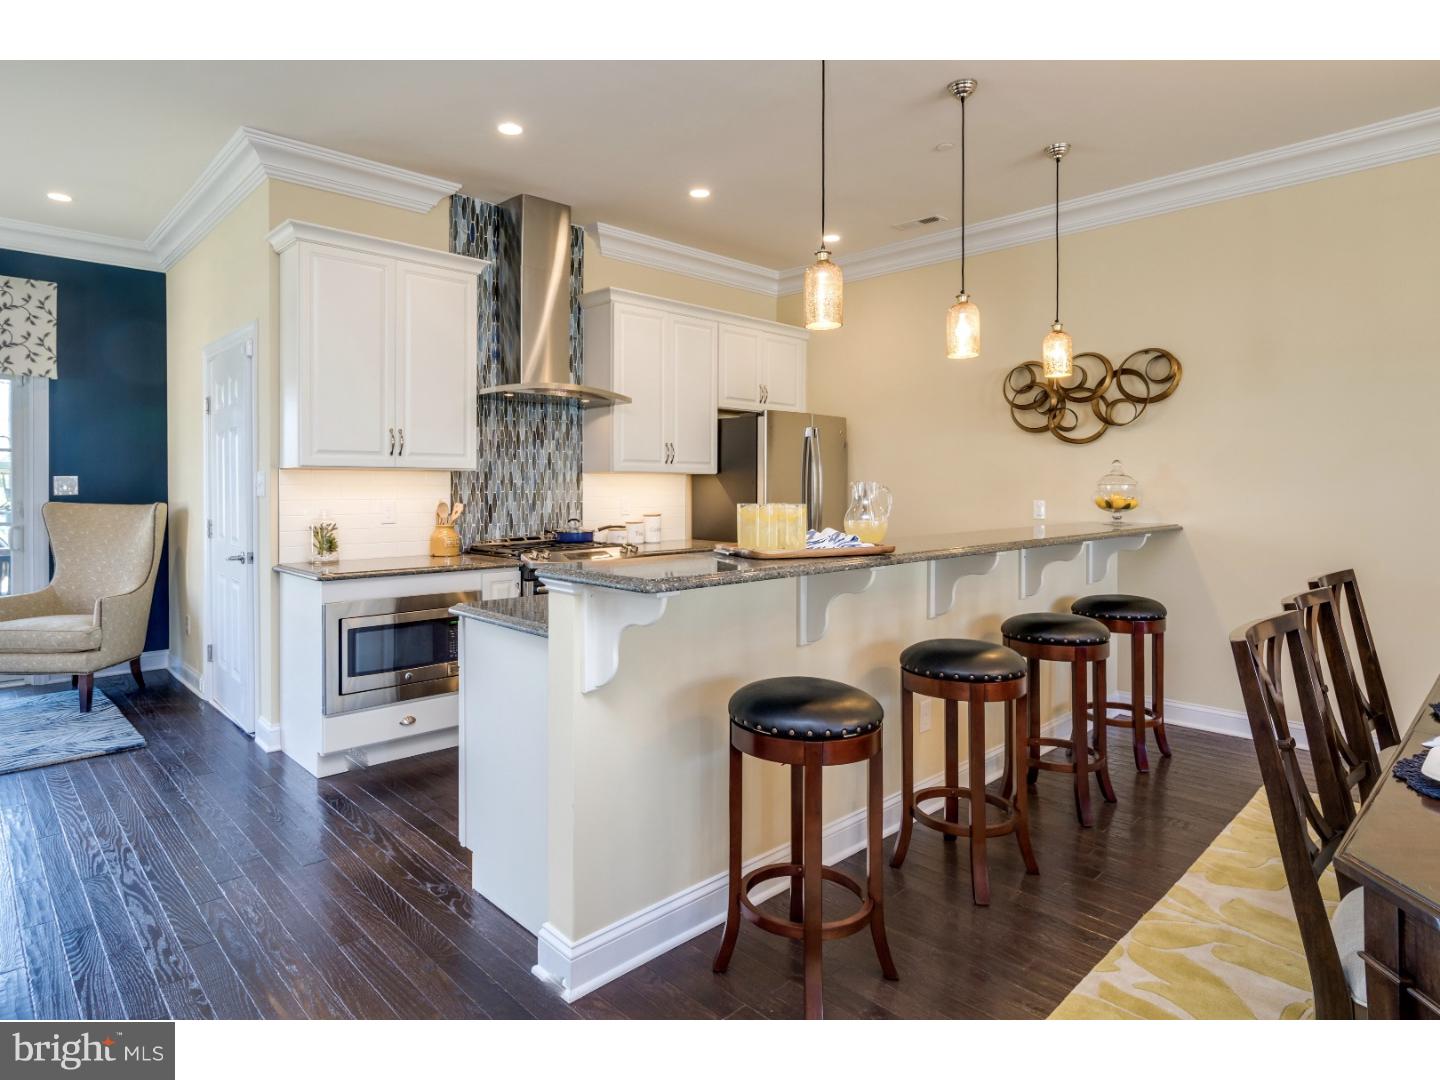 a kitchen with kitchen island stainless steel appliances a dining table chairs sink and stove